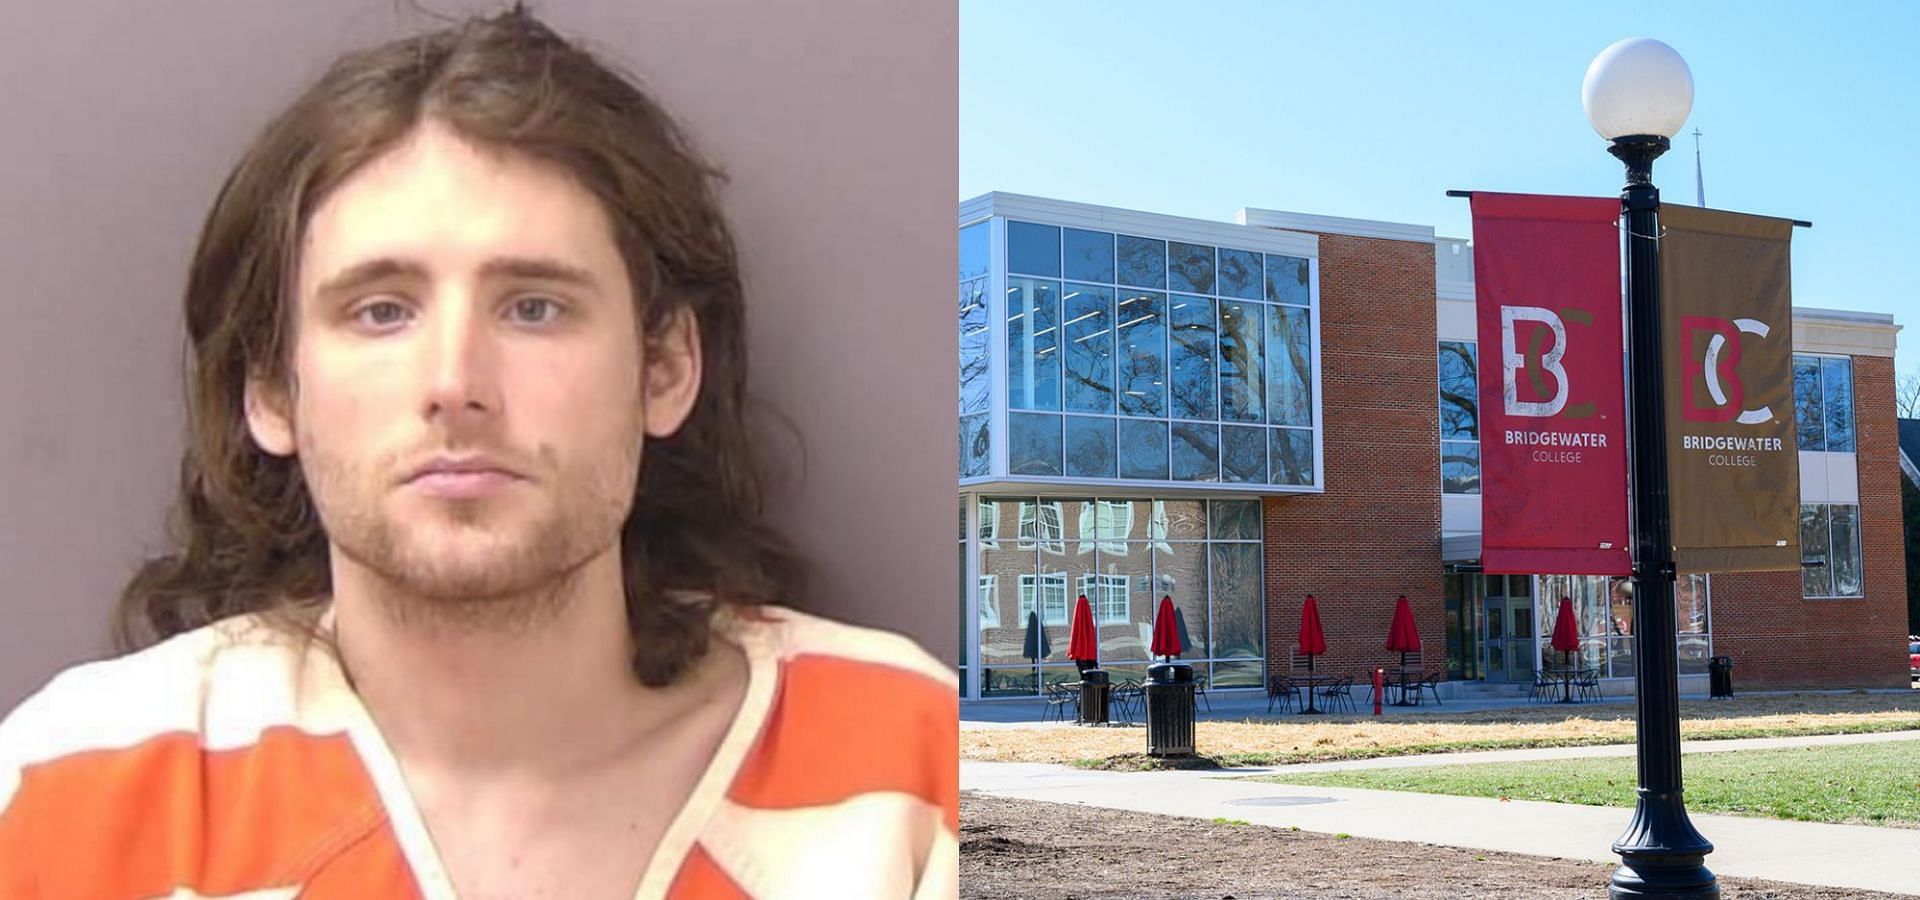 Alexander Wyatt Campbell allegedly shot two campus officers at Bridgewater College (Image via Virginia State Police and Getty Images)